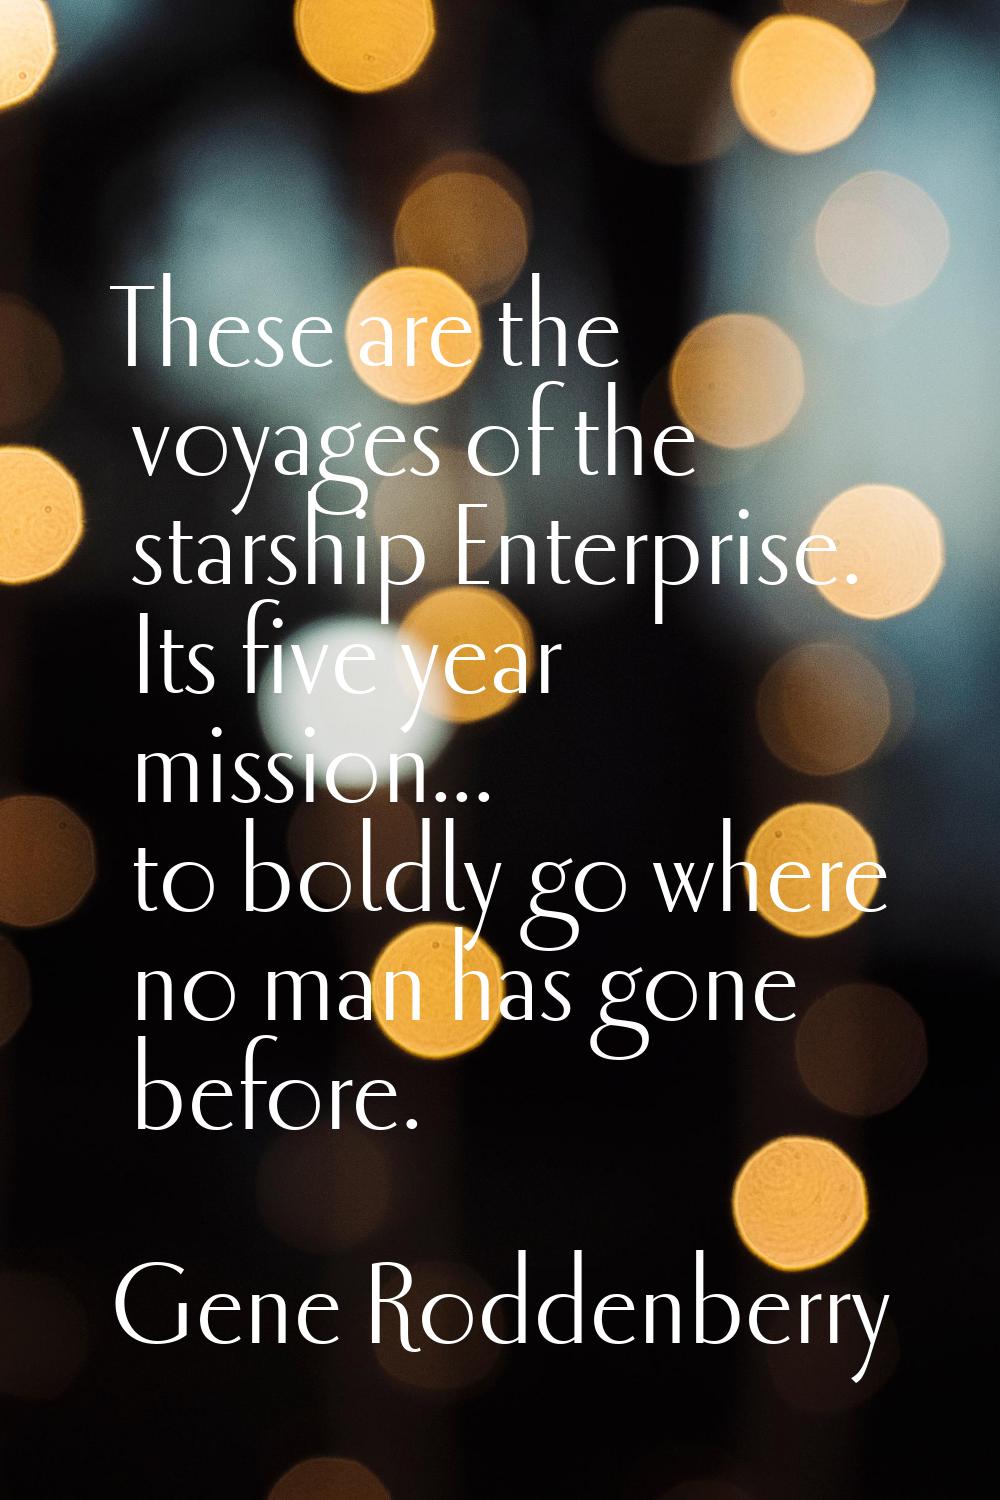 These are the voyages of the starship Enterprise. Its five year mission... to boldly go where no ma